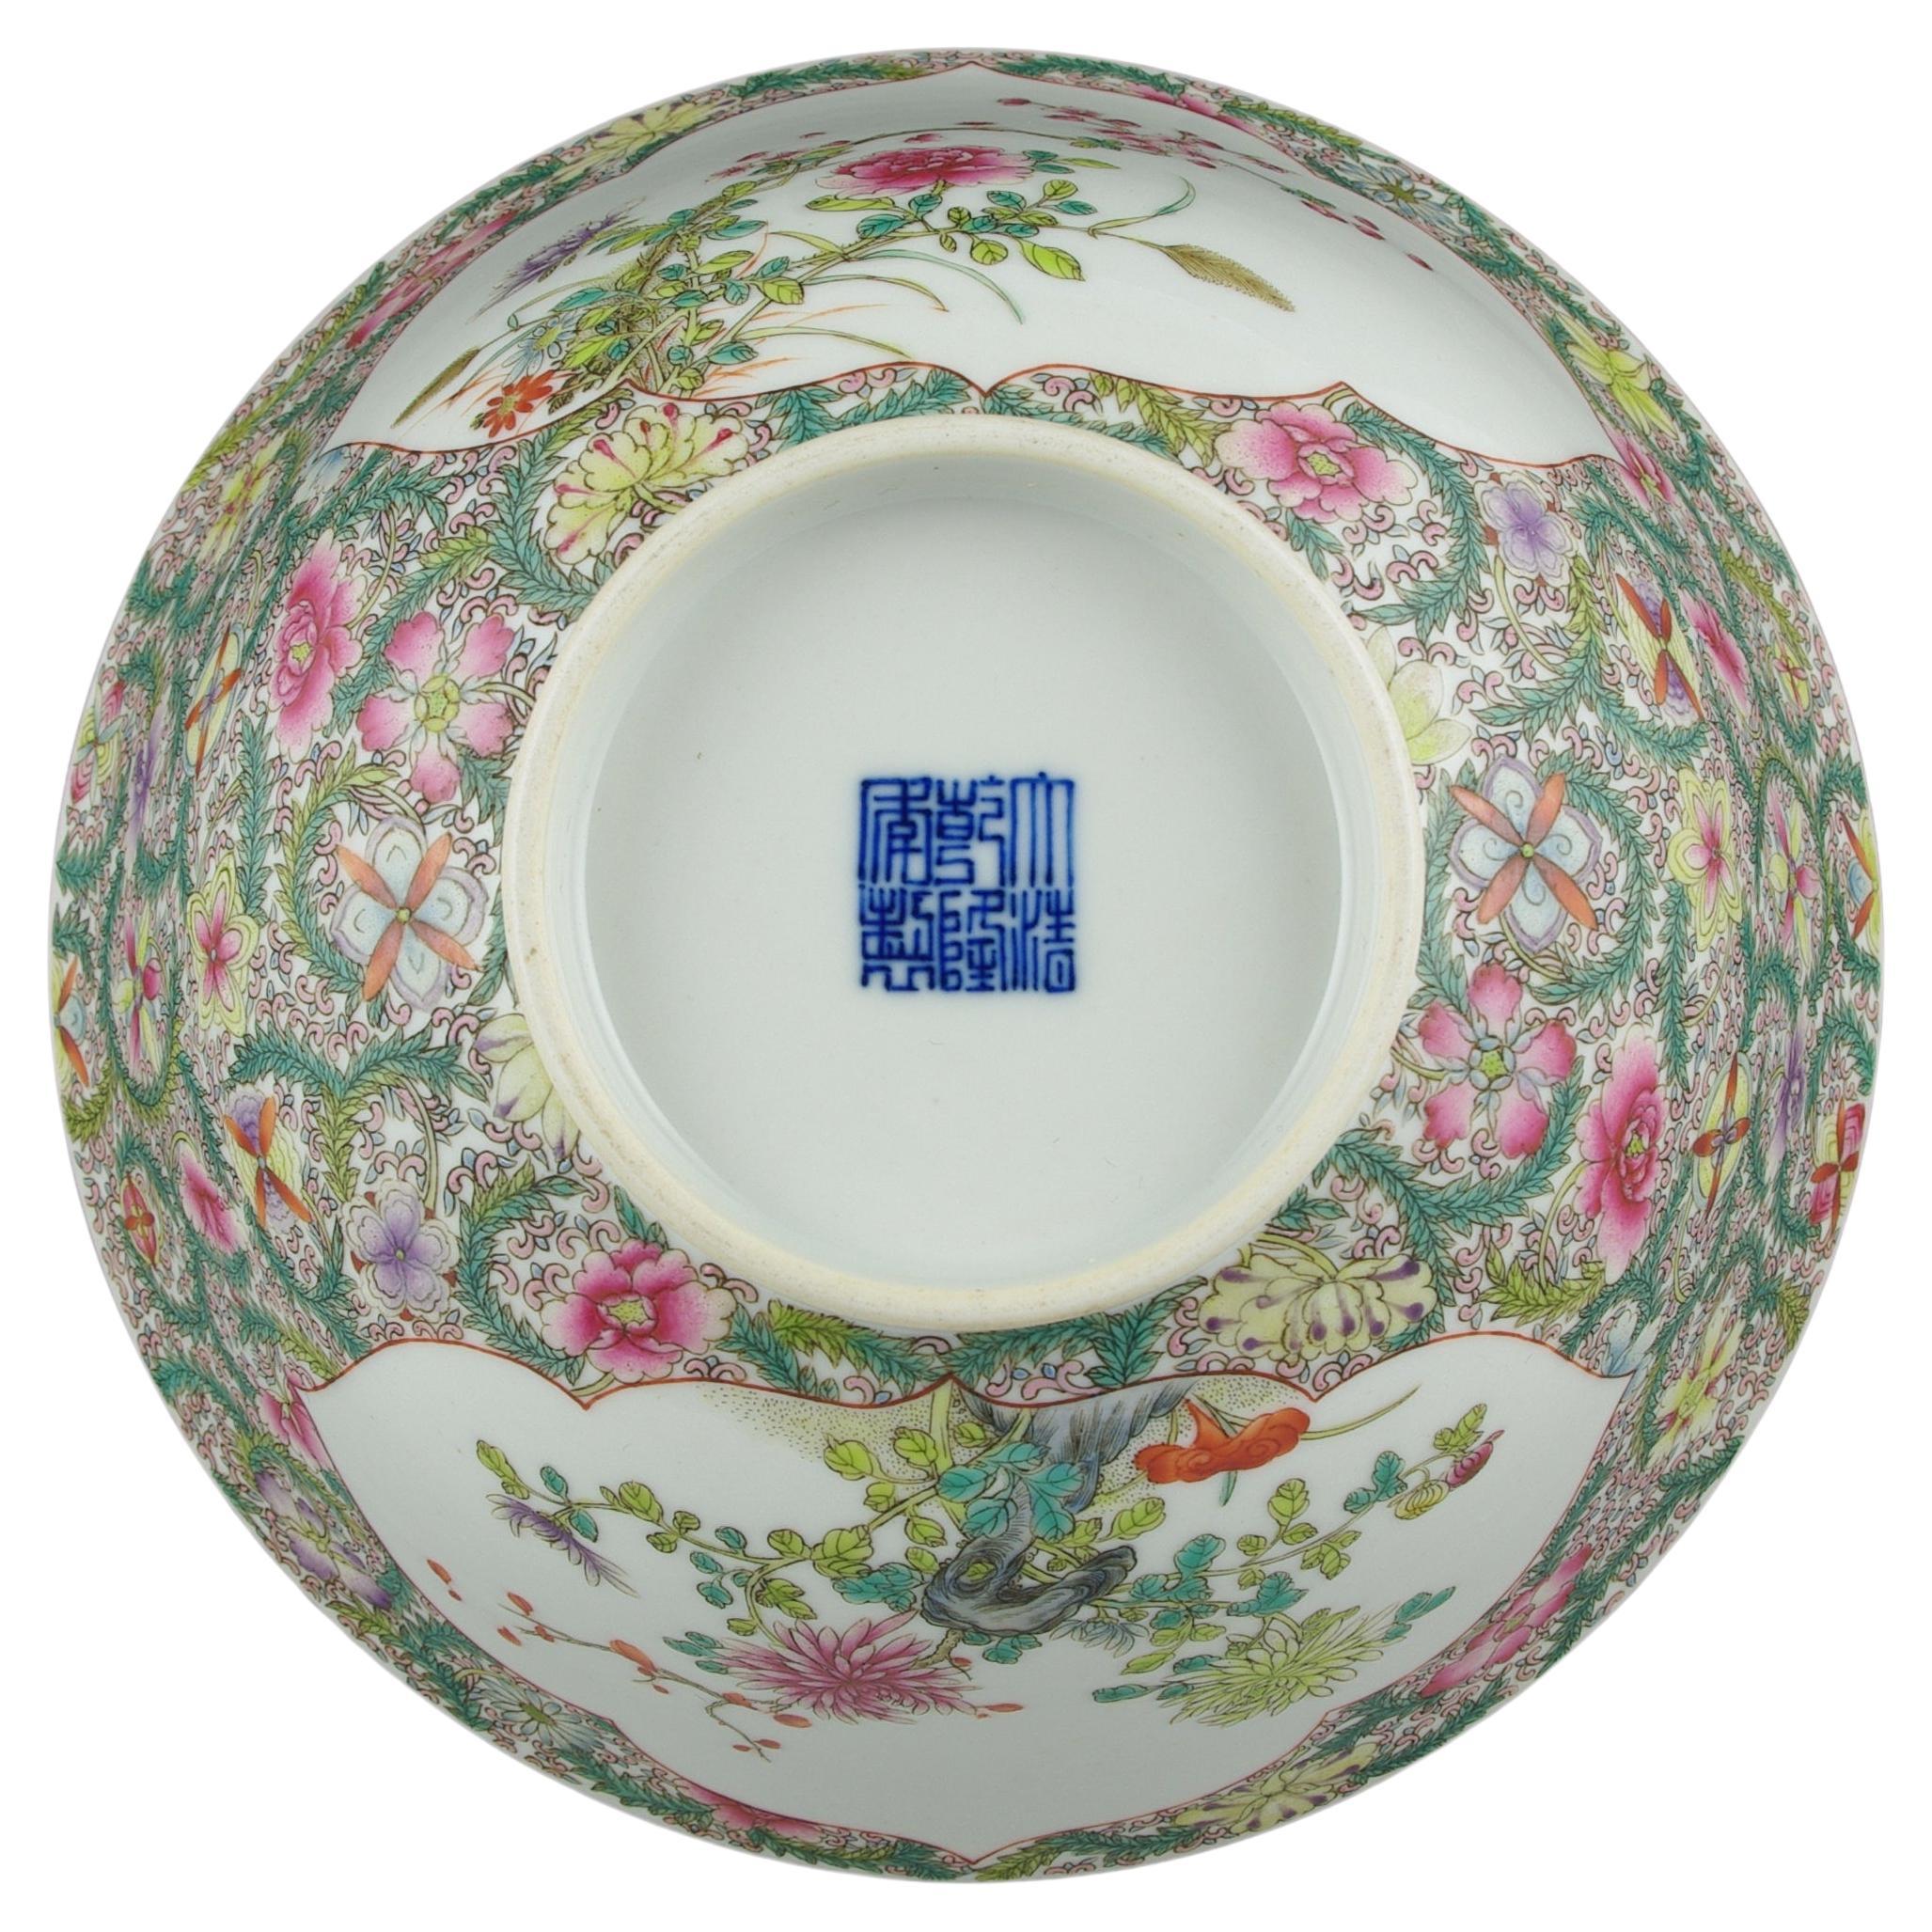 Fine Chinese Porcelain Famille Rose Fencai Flower Bowl Millefleur Ground 20c In Good Condition For Sale In Richmond, CA